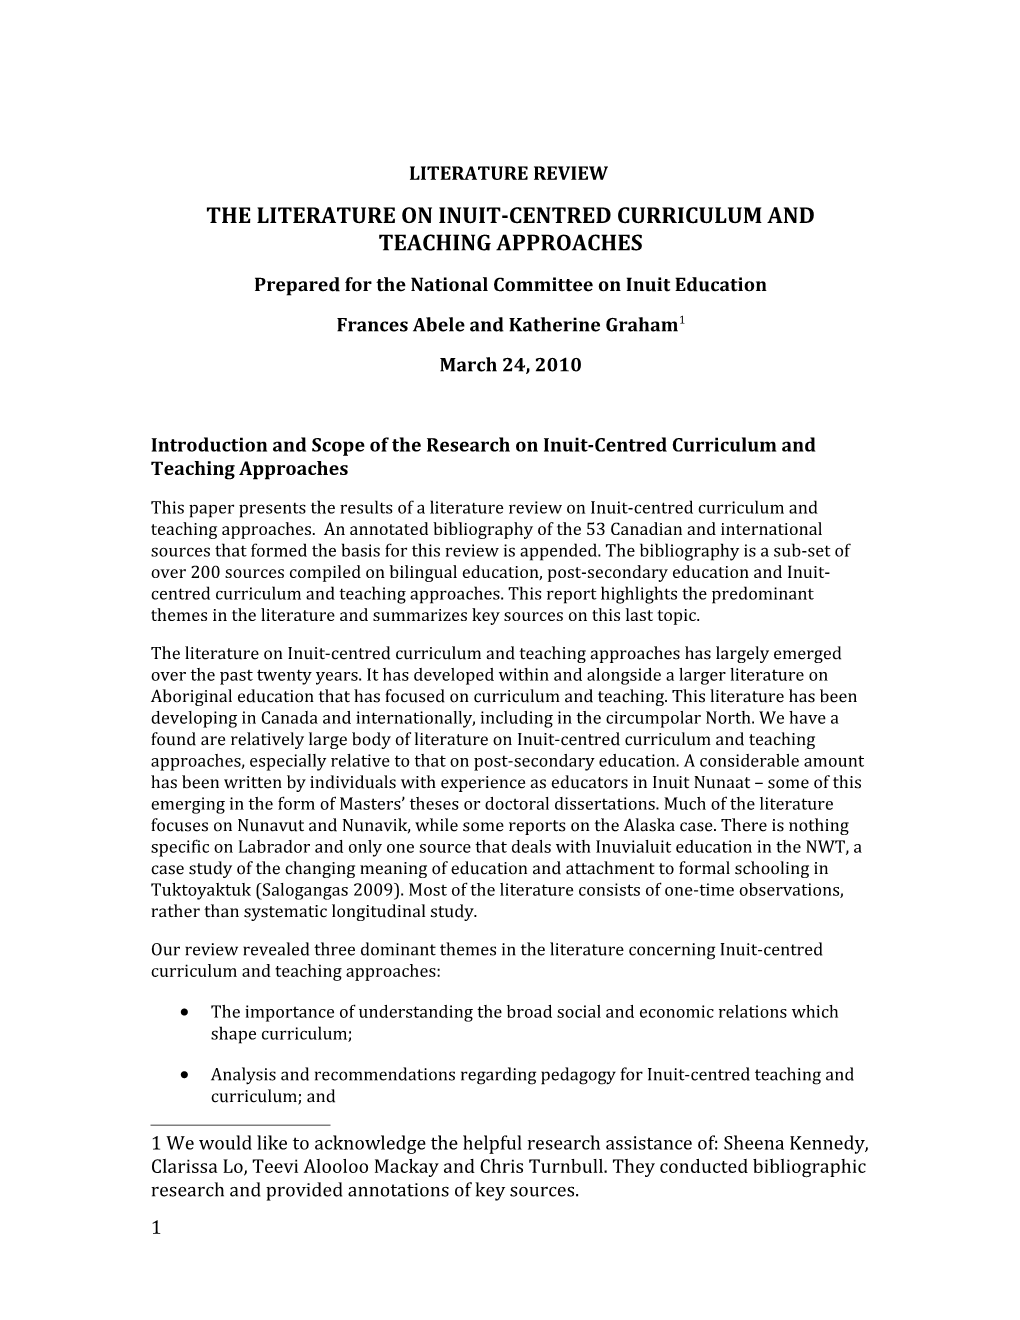 The Literature on Inuit-Centred Curriculum and Teaching Approaches